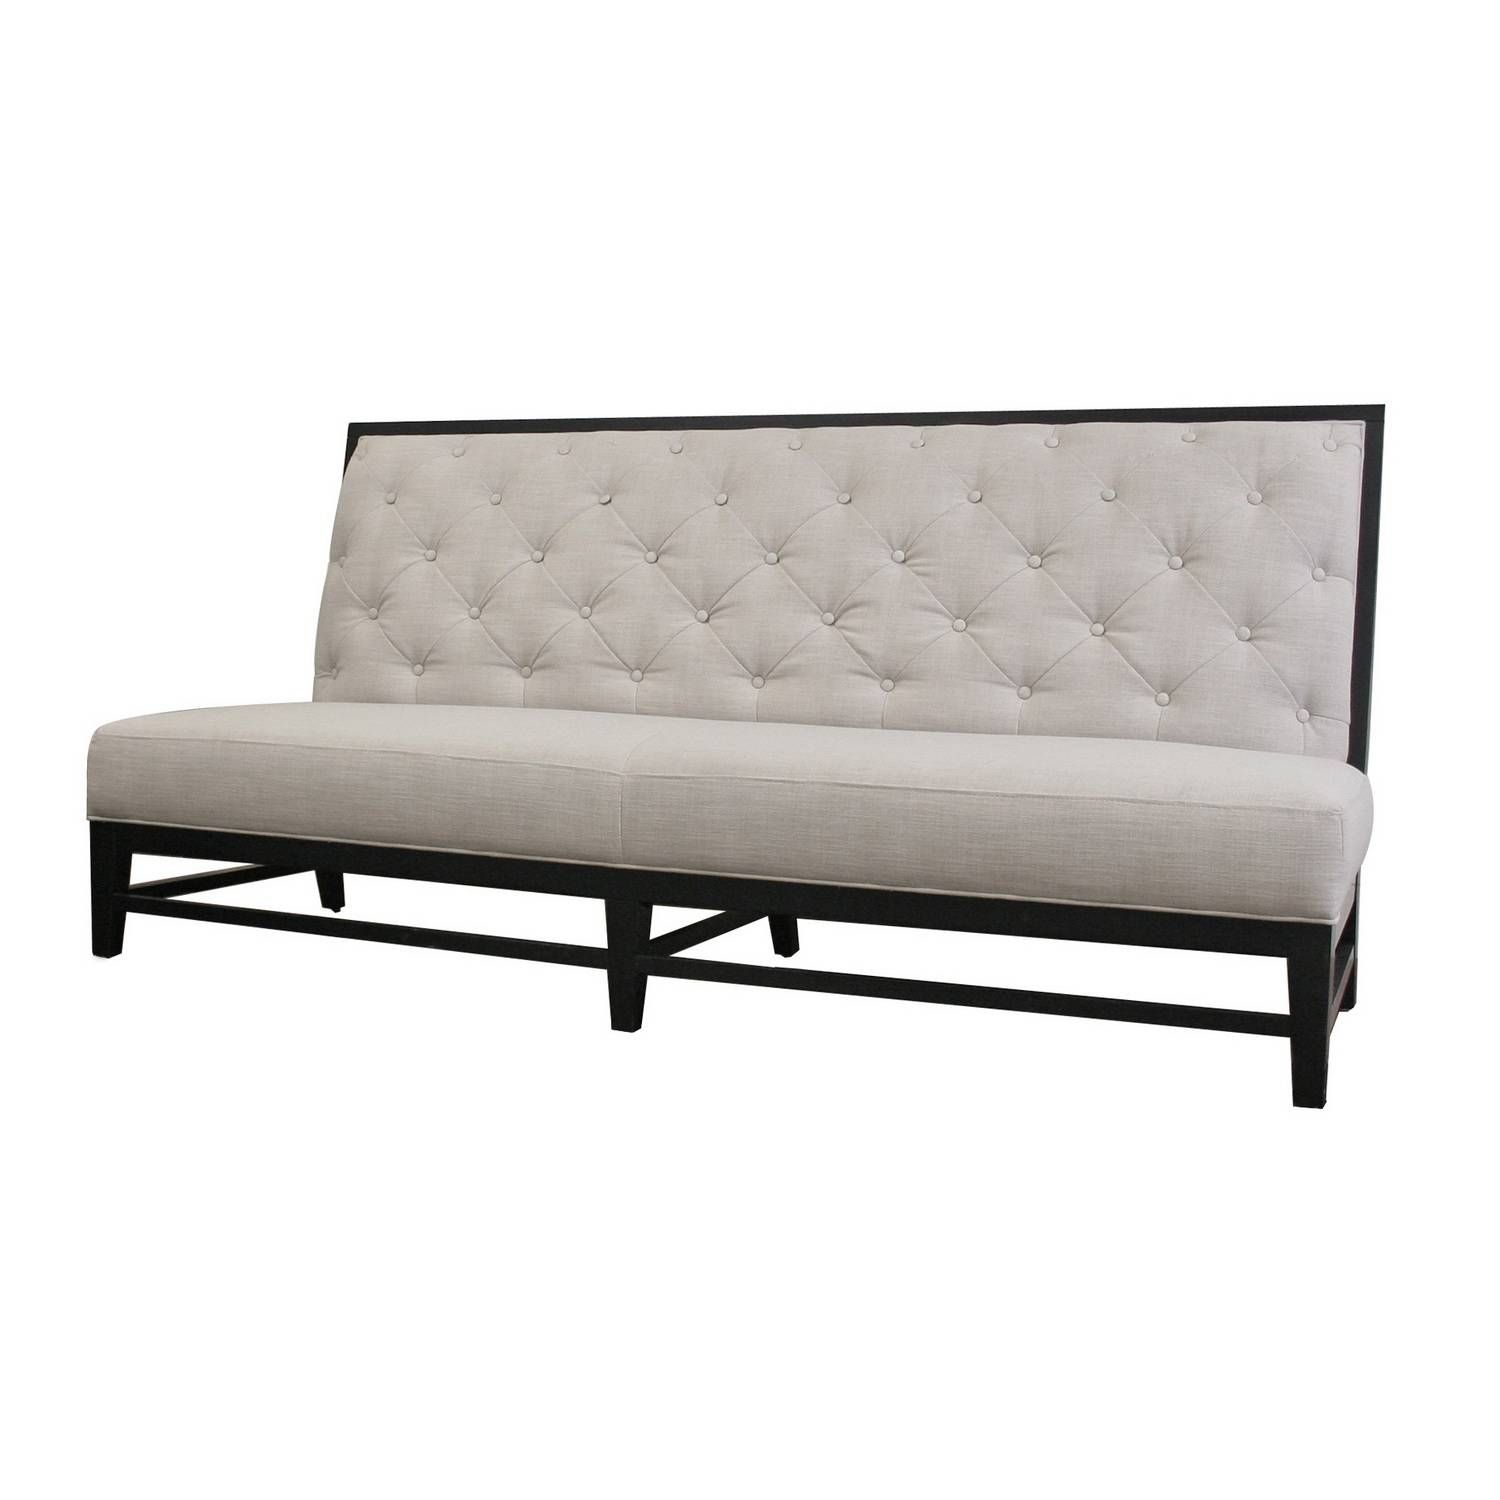 White Leather Modern Tufted Sofa With Black Wooden Frame For With Leather Bench Sofas (View 8 of 30)